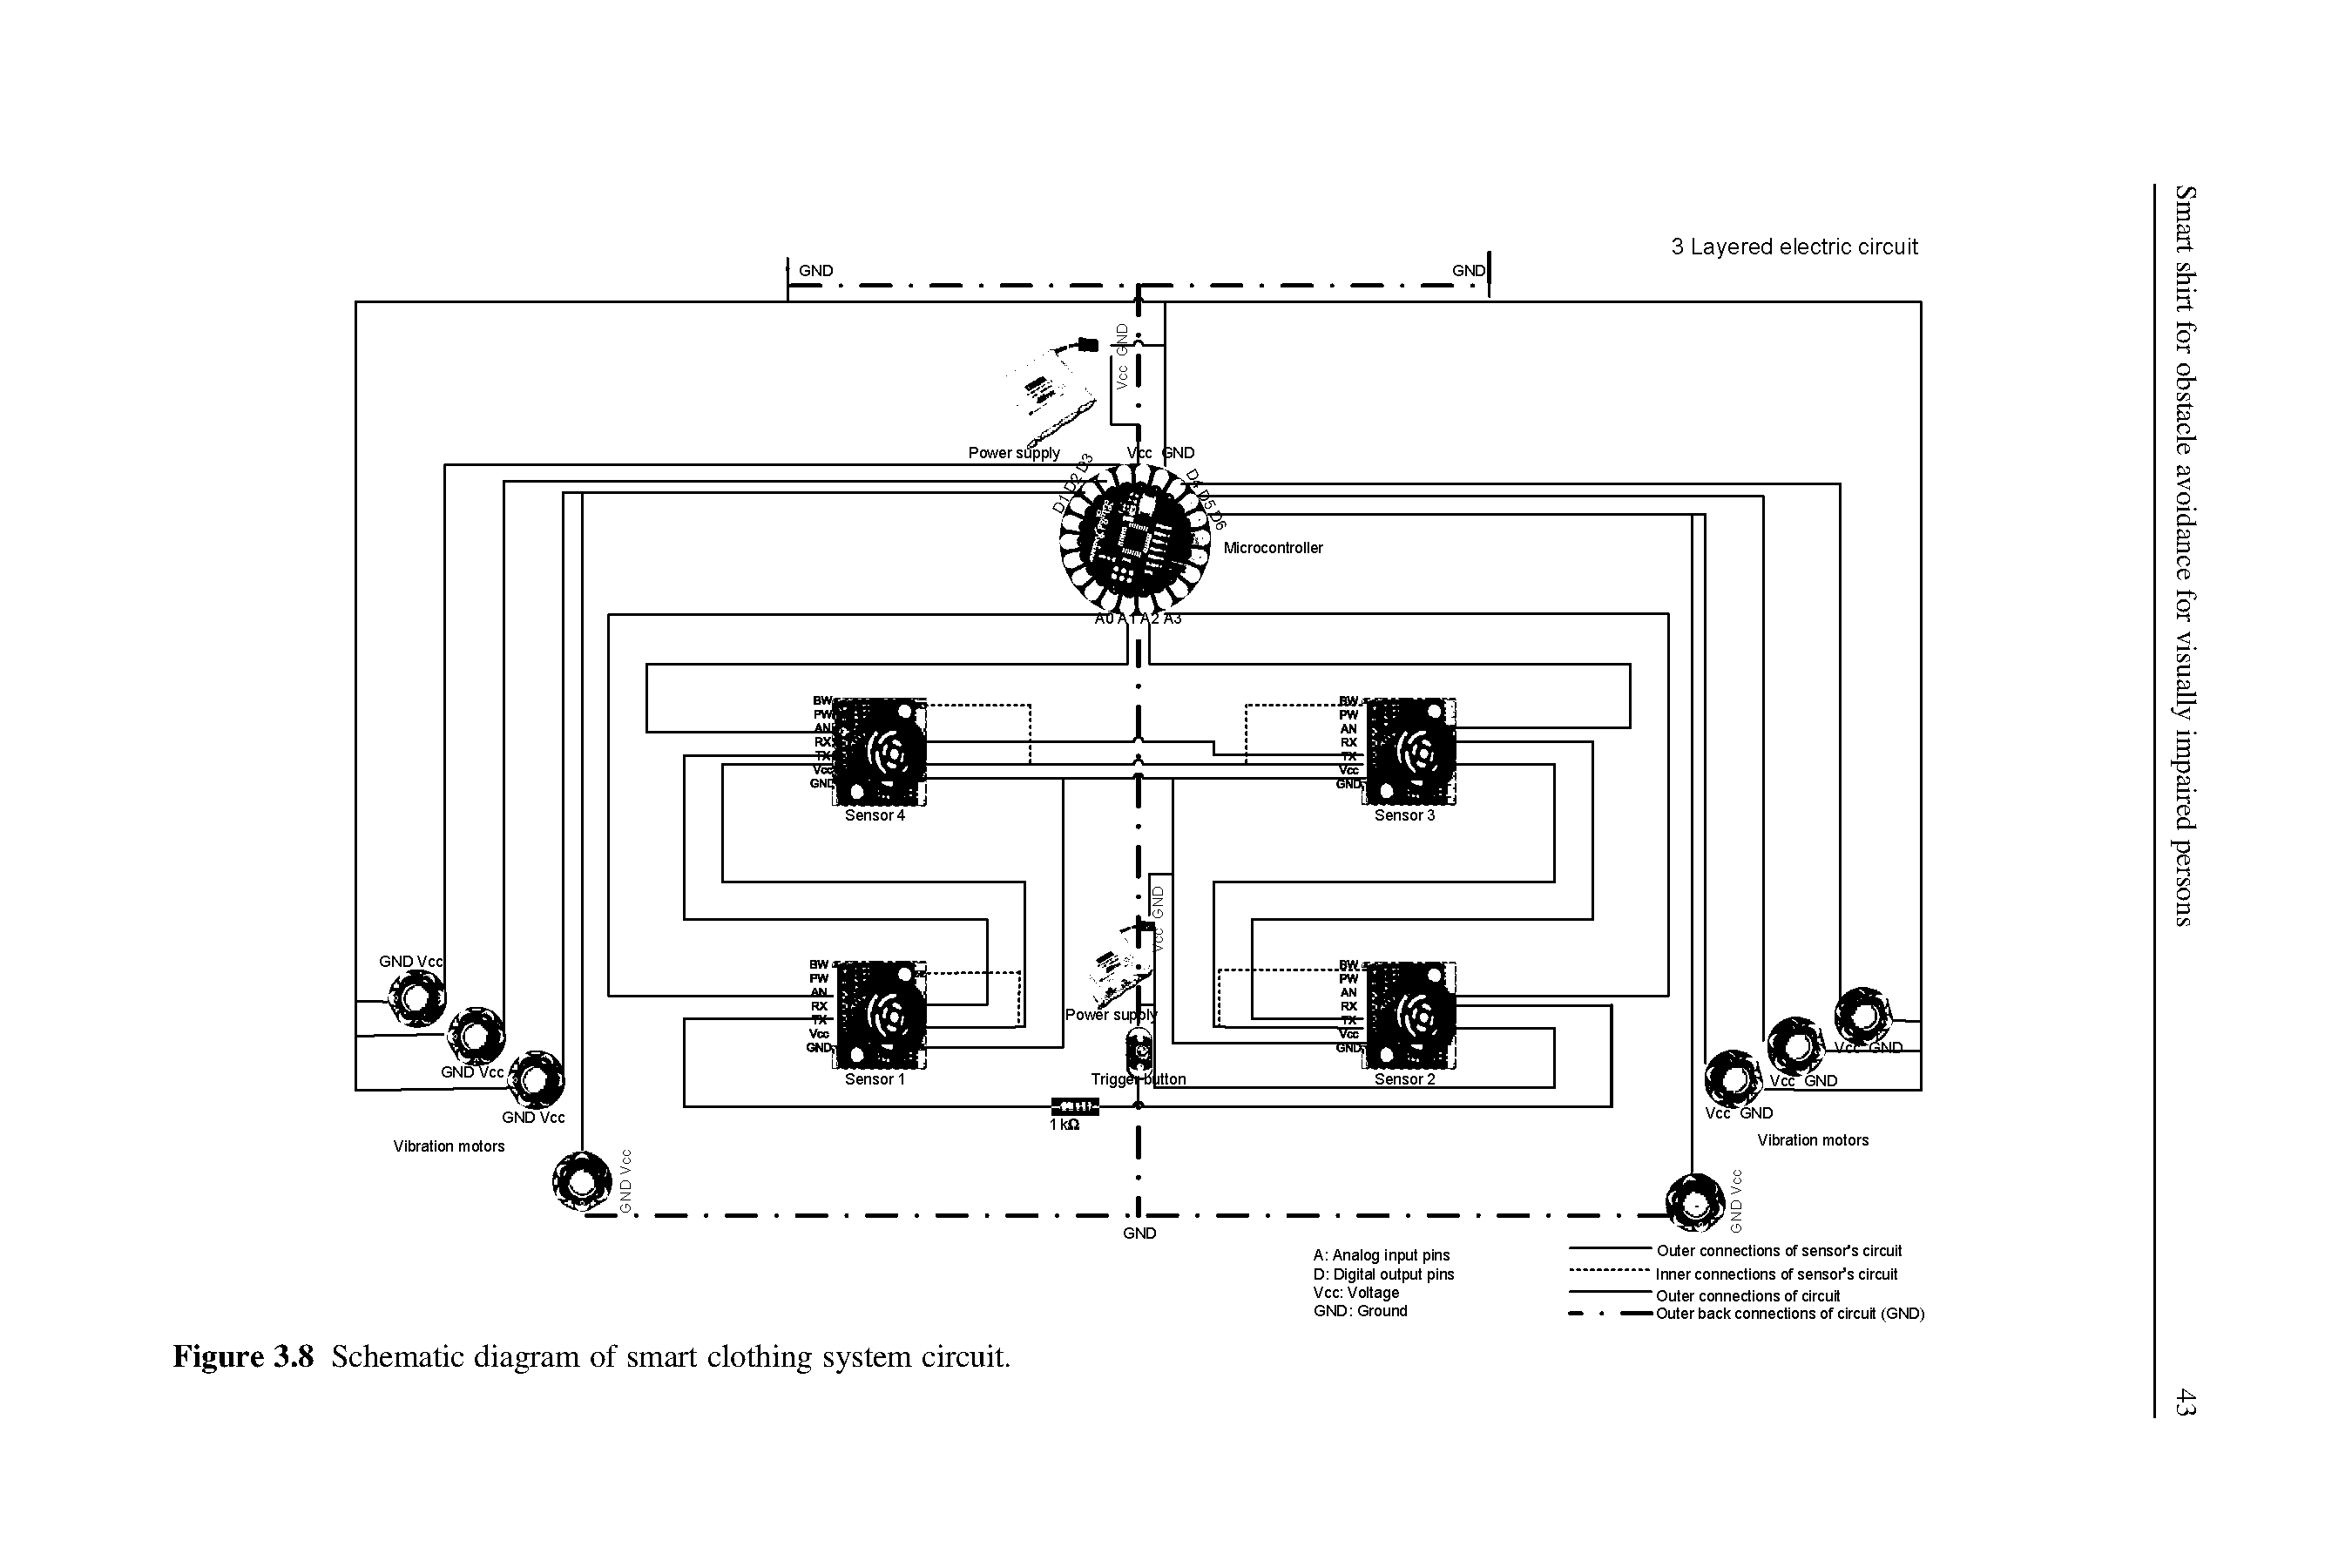 Figure 3.8 Schematic diagram of smart clothing system circuit.